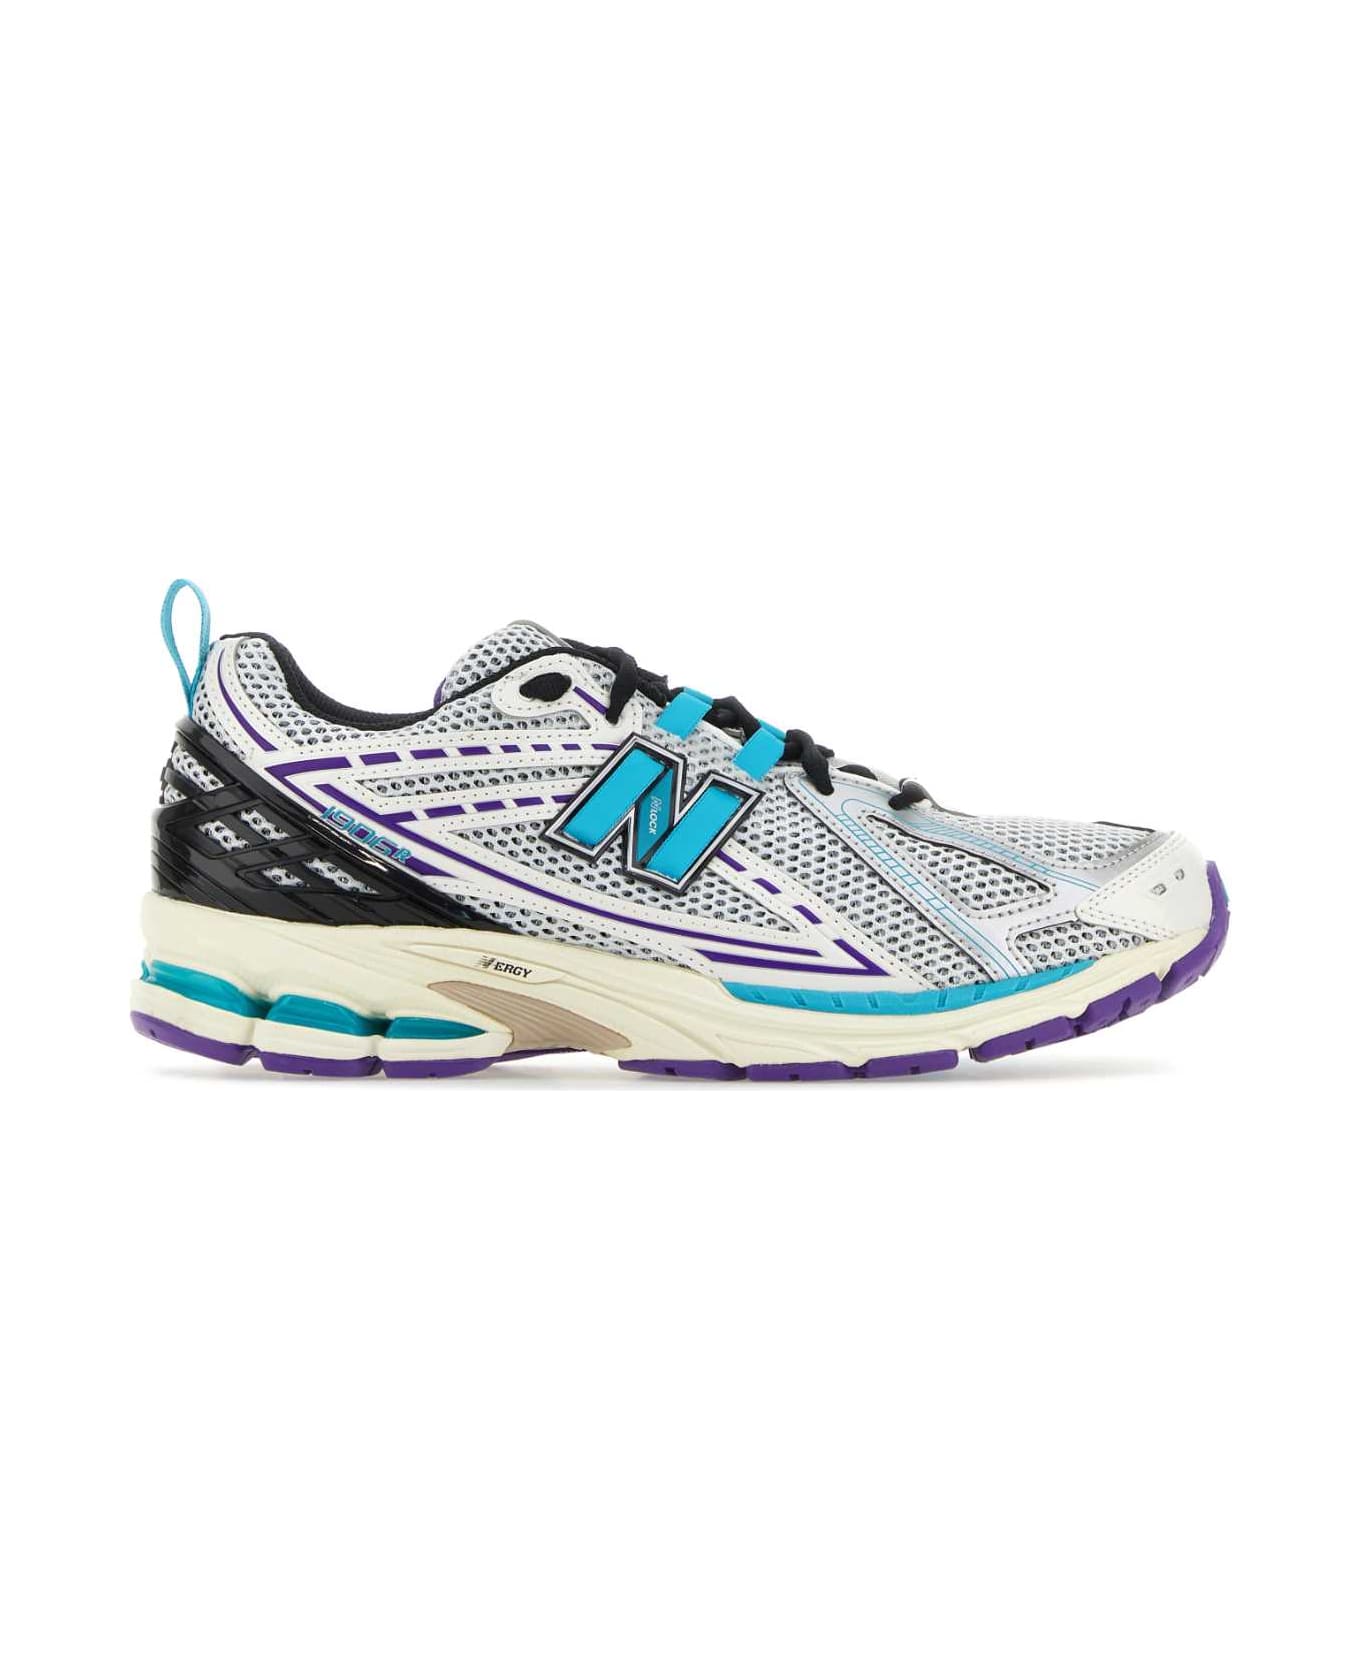 New Balance Multicolor Fabric And Mesh 1960r Sneakers - SILVERBLUE スニーカー